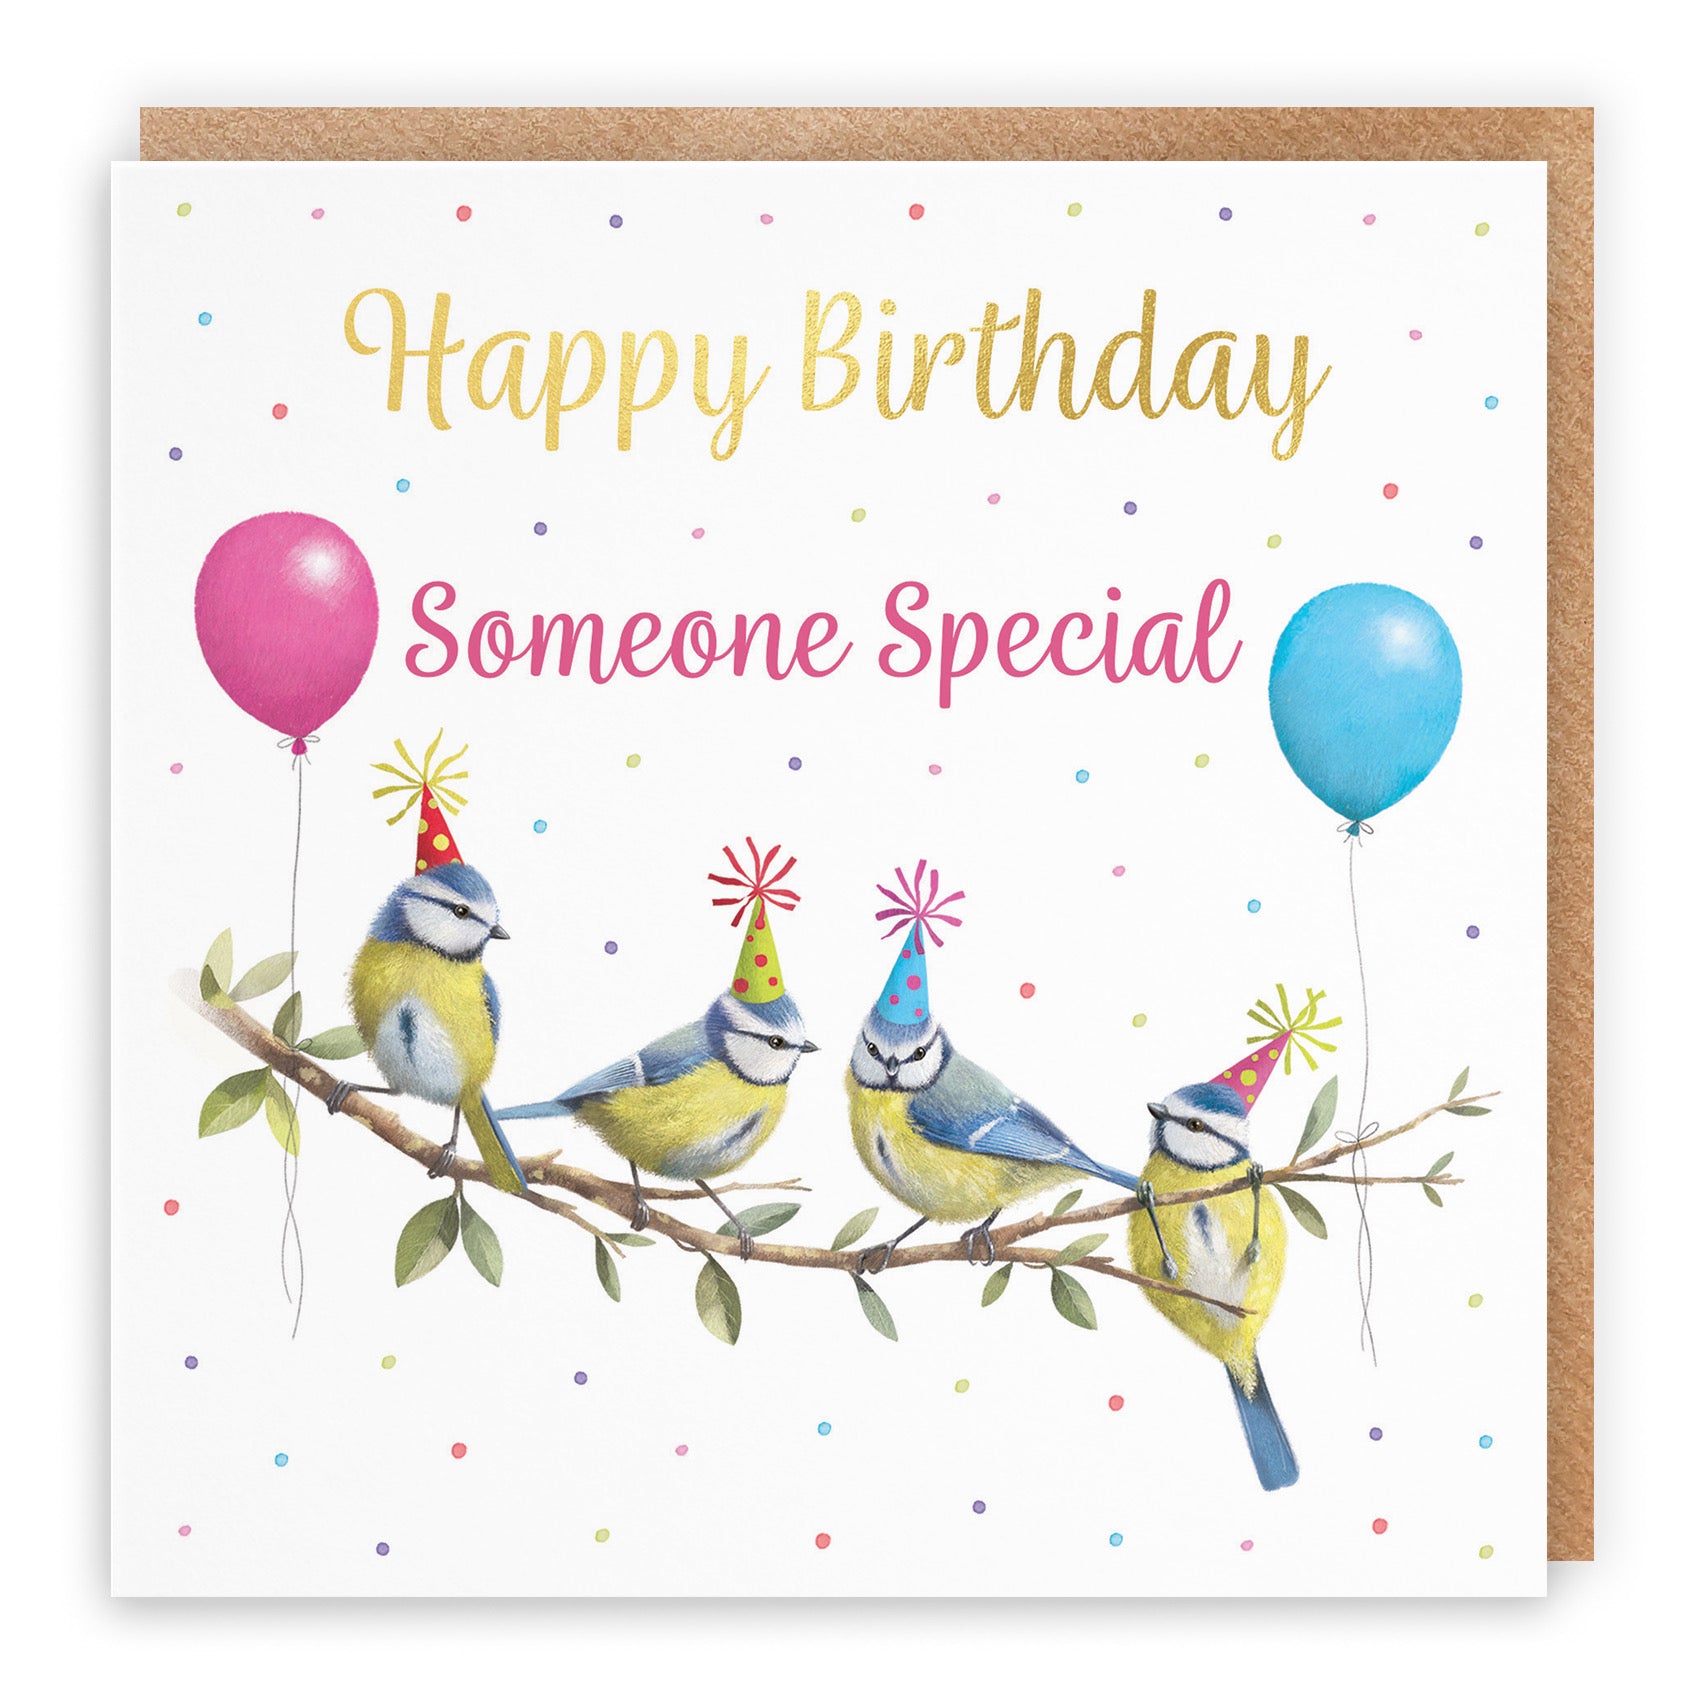 Someone Special Blue Tits Birthday Card Gold Foil Milo's Gallery - Default Title (B0CV9TNT6Y)